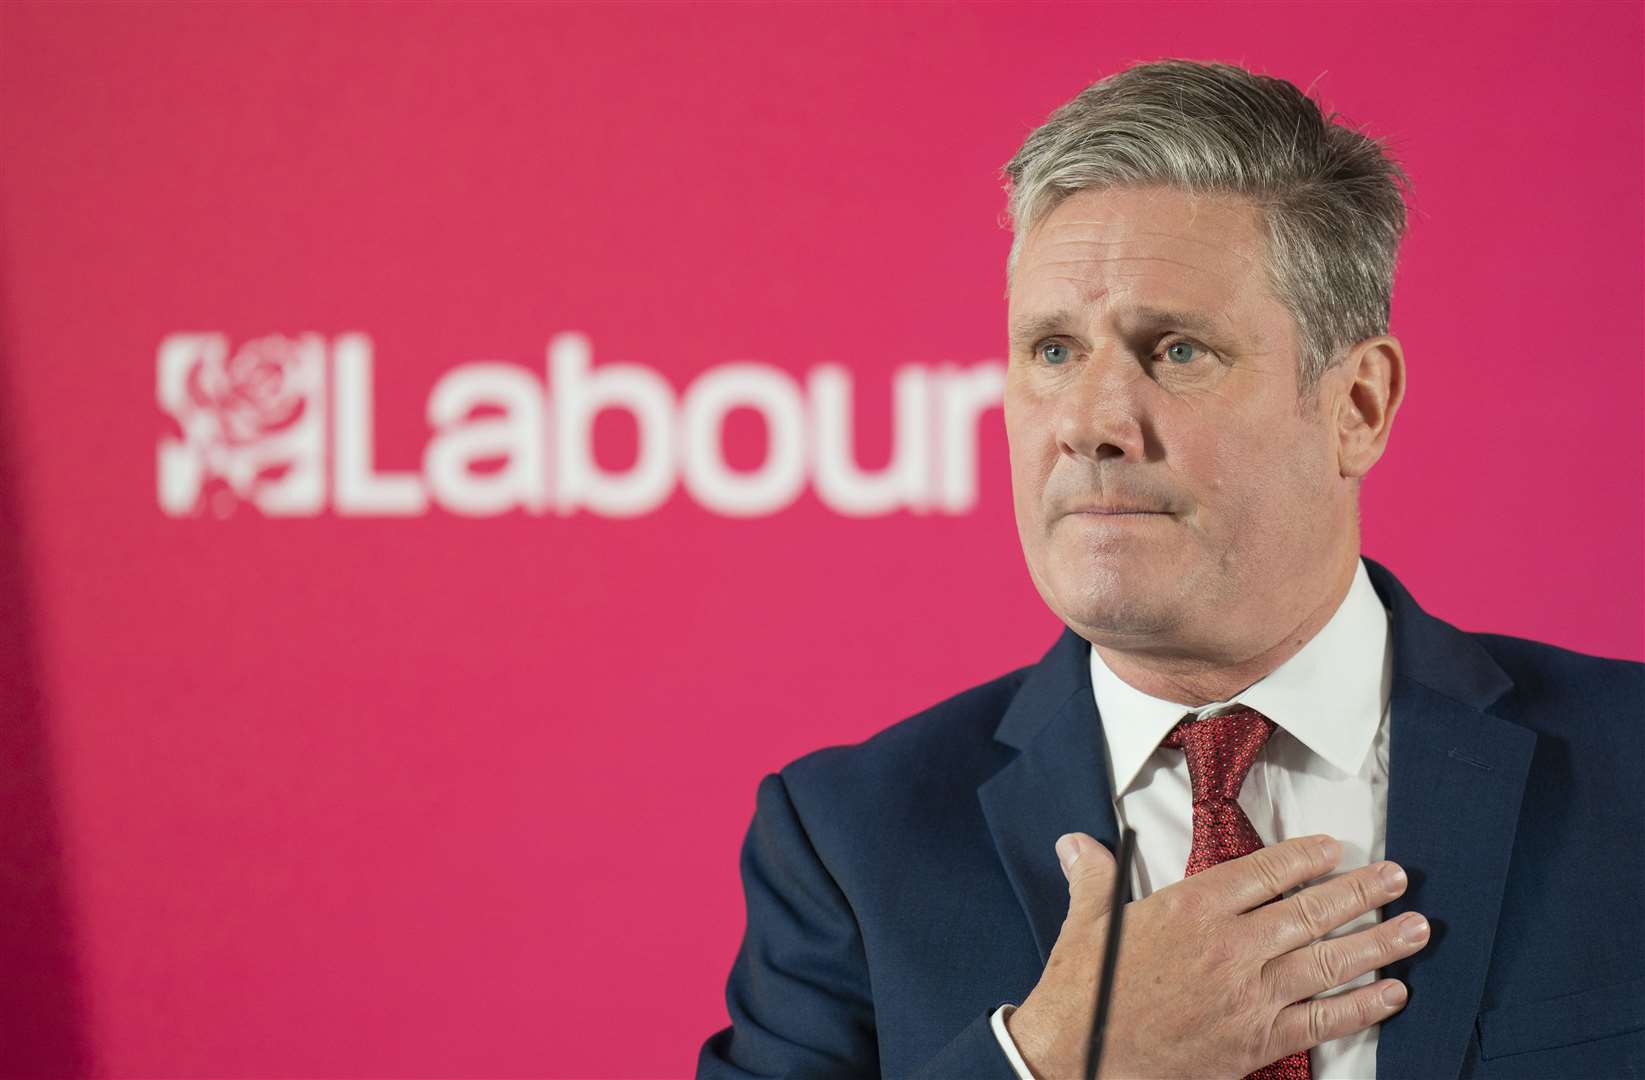 Sir Keir Starmer will set out Labour’s plans on Monday (Danny Lawson/PA)